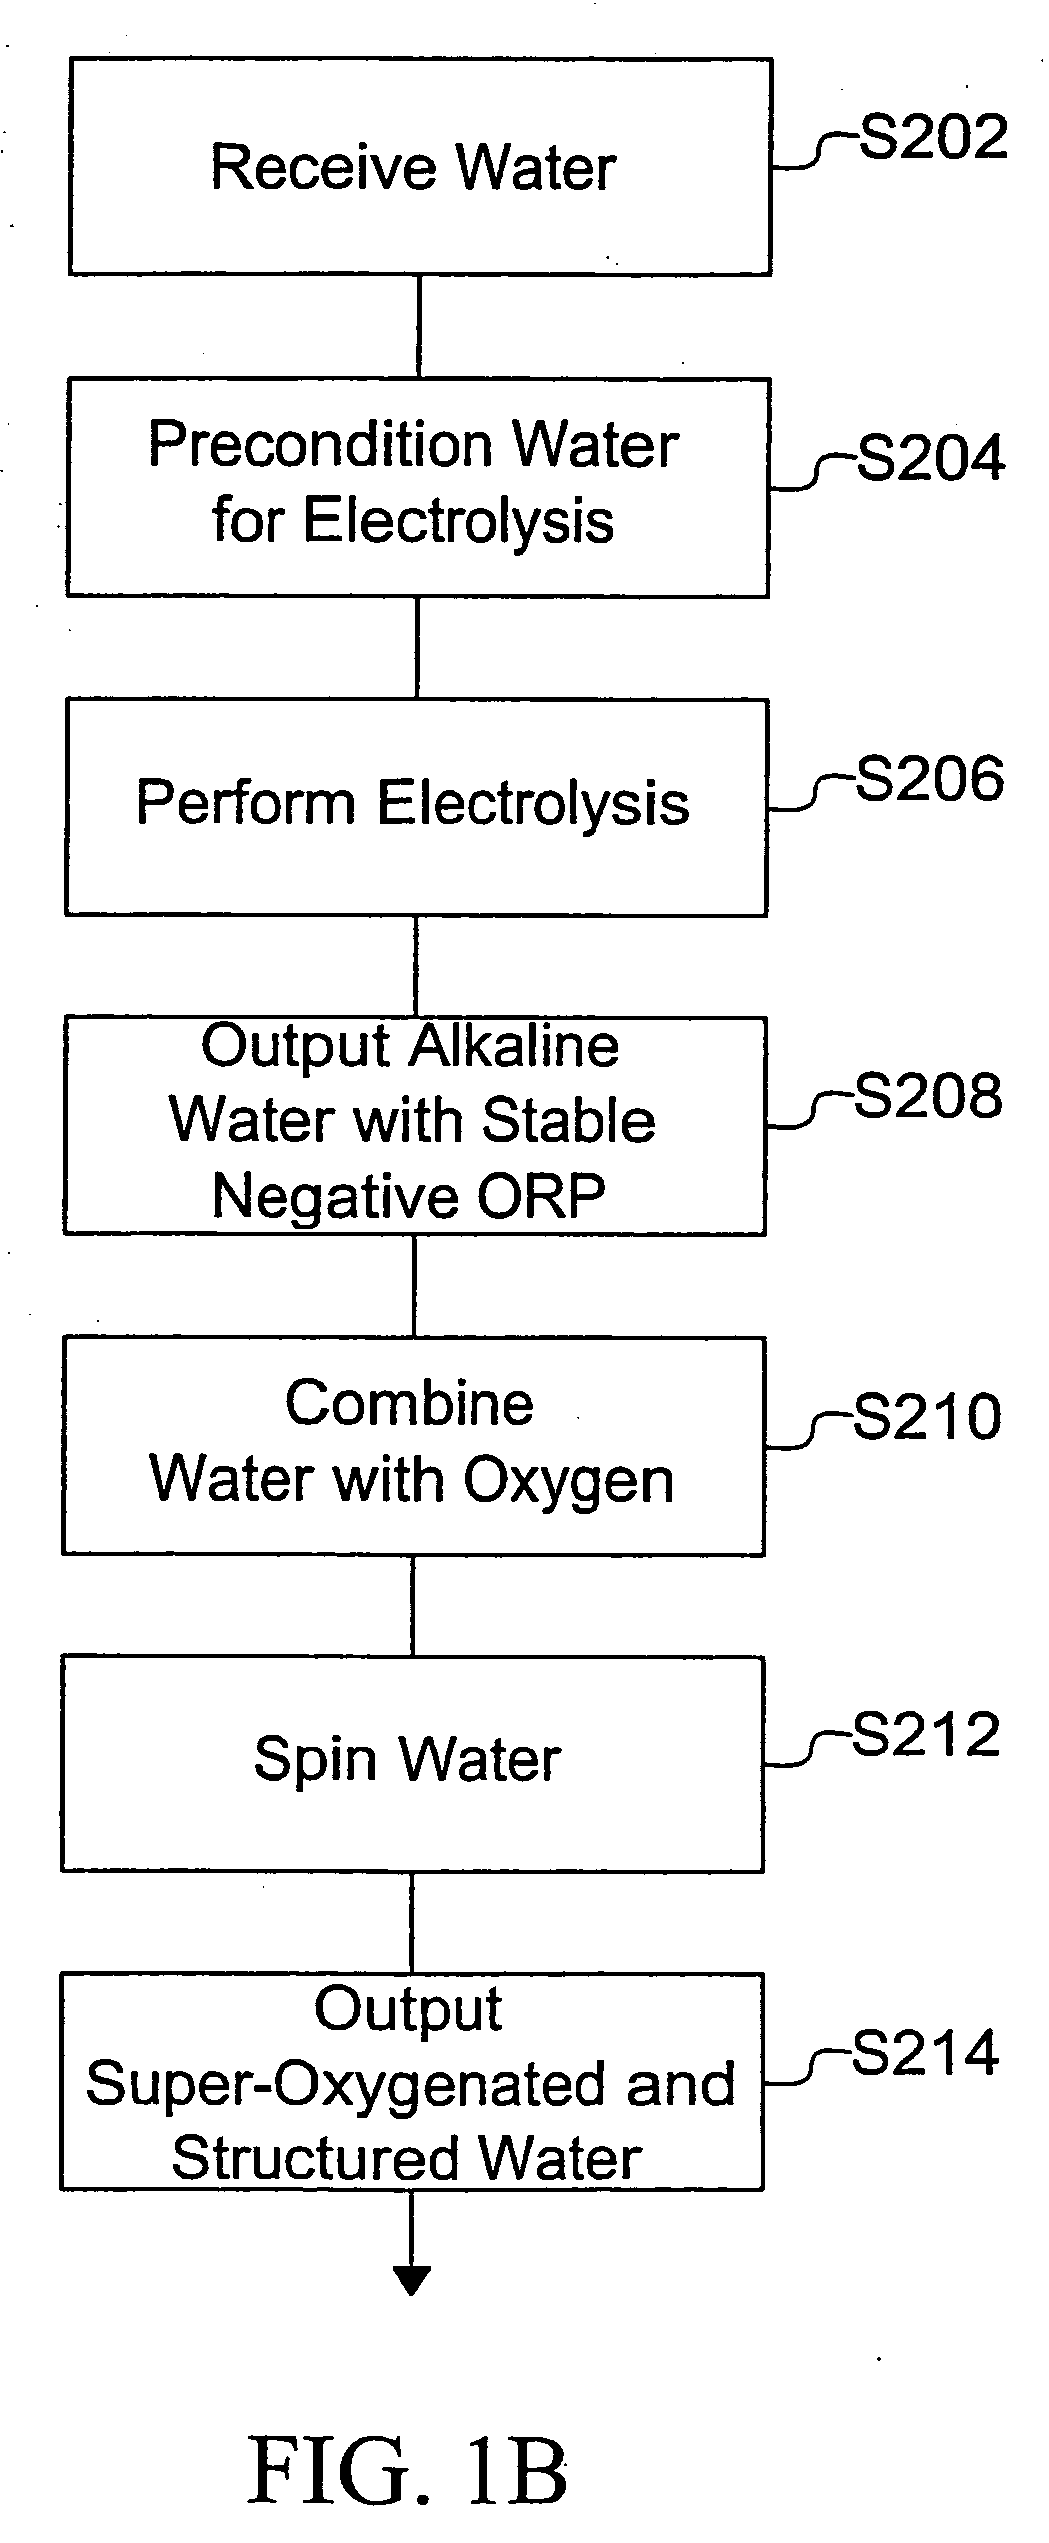 Method for tuning super-oxygenated and structured water to have multiple attributes